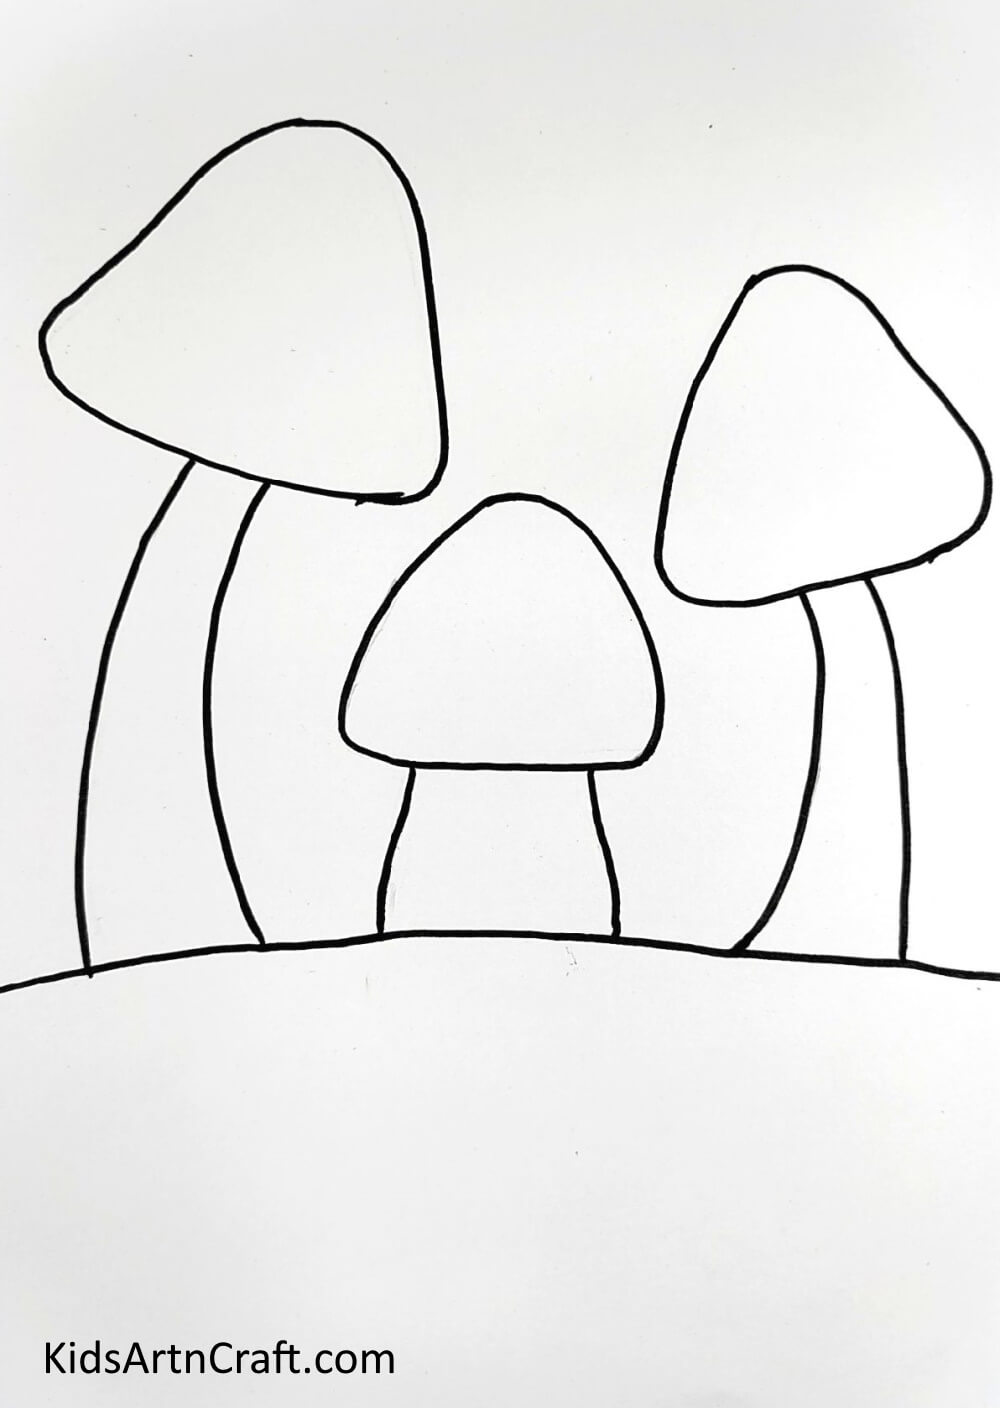 Drawing Mushrooms Step-by-Step Guide to Making a Mushroom Sketch for Children 